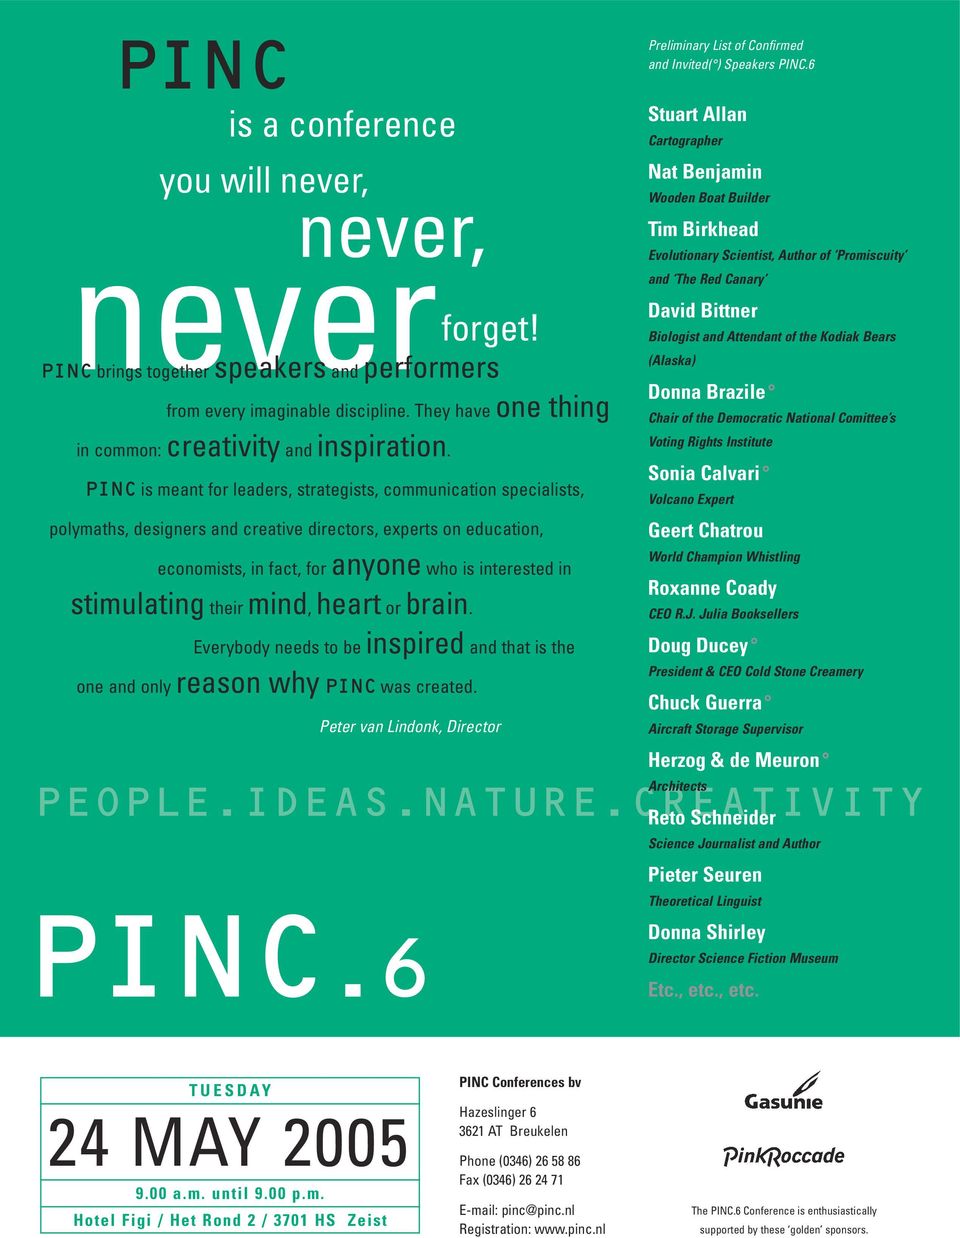 their mind, heart or brain. Everybody needs to be inspired and that is the one and only reason why PINC was created.